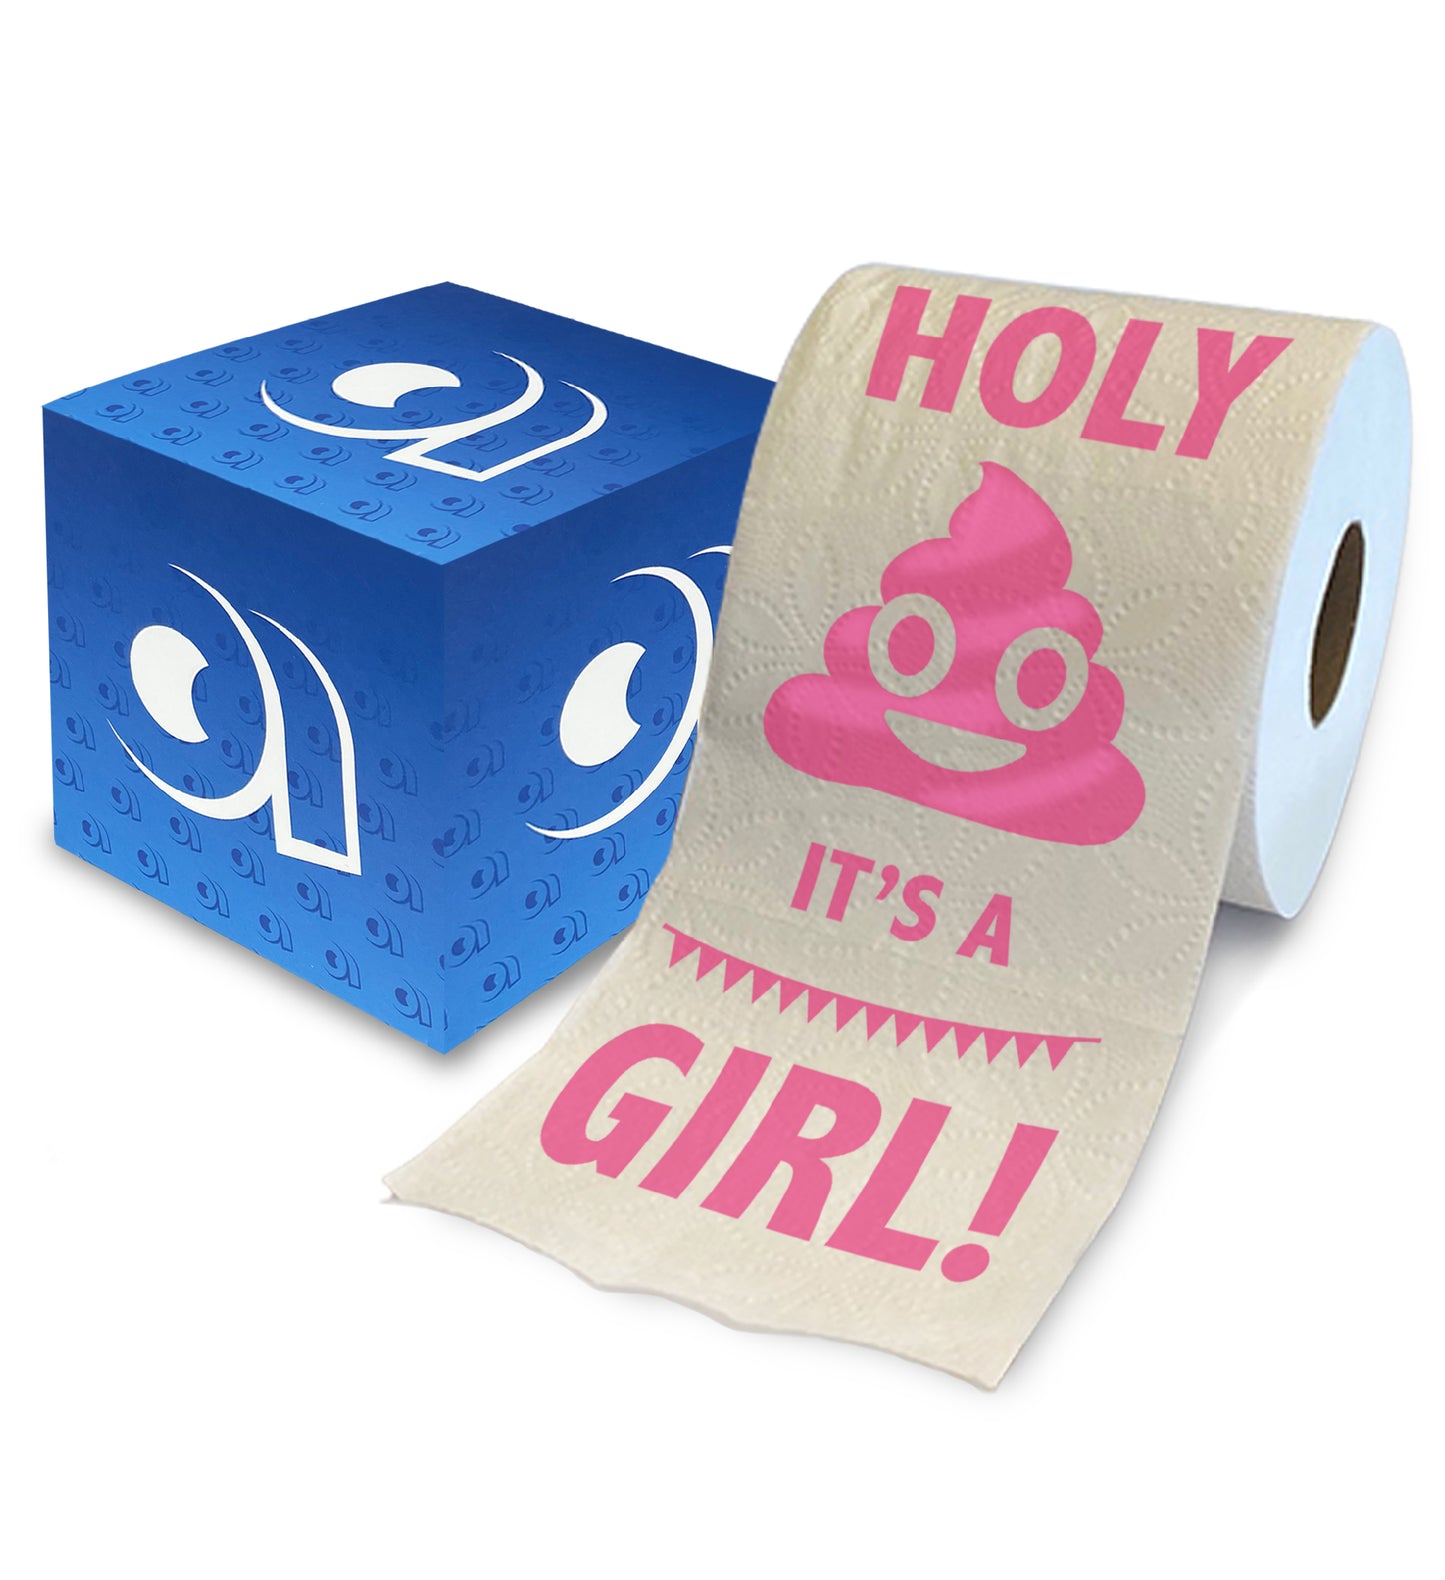 Printed TP Holy Poop It's a Girl! Toilet Paper Roll Baby Shower Gender Reveal